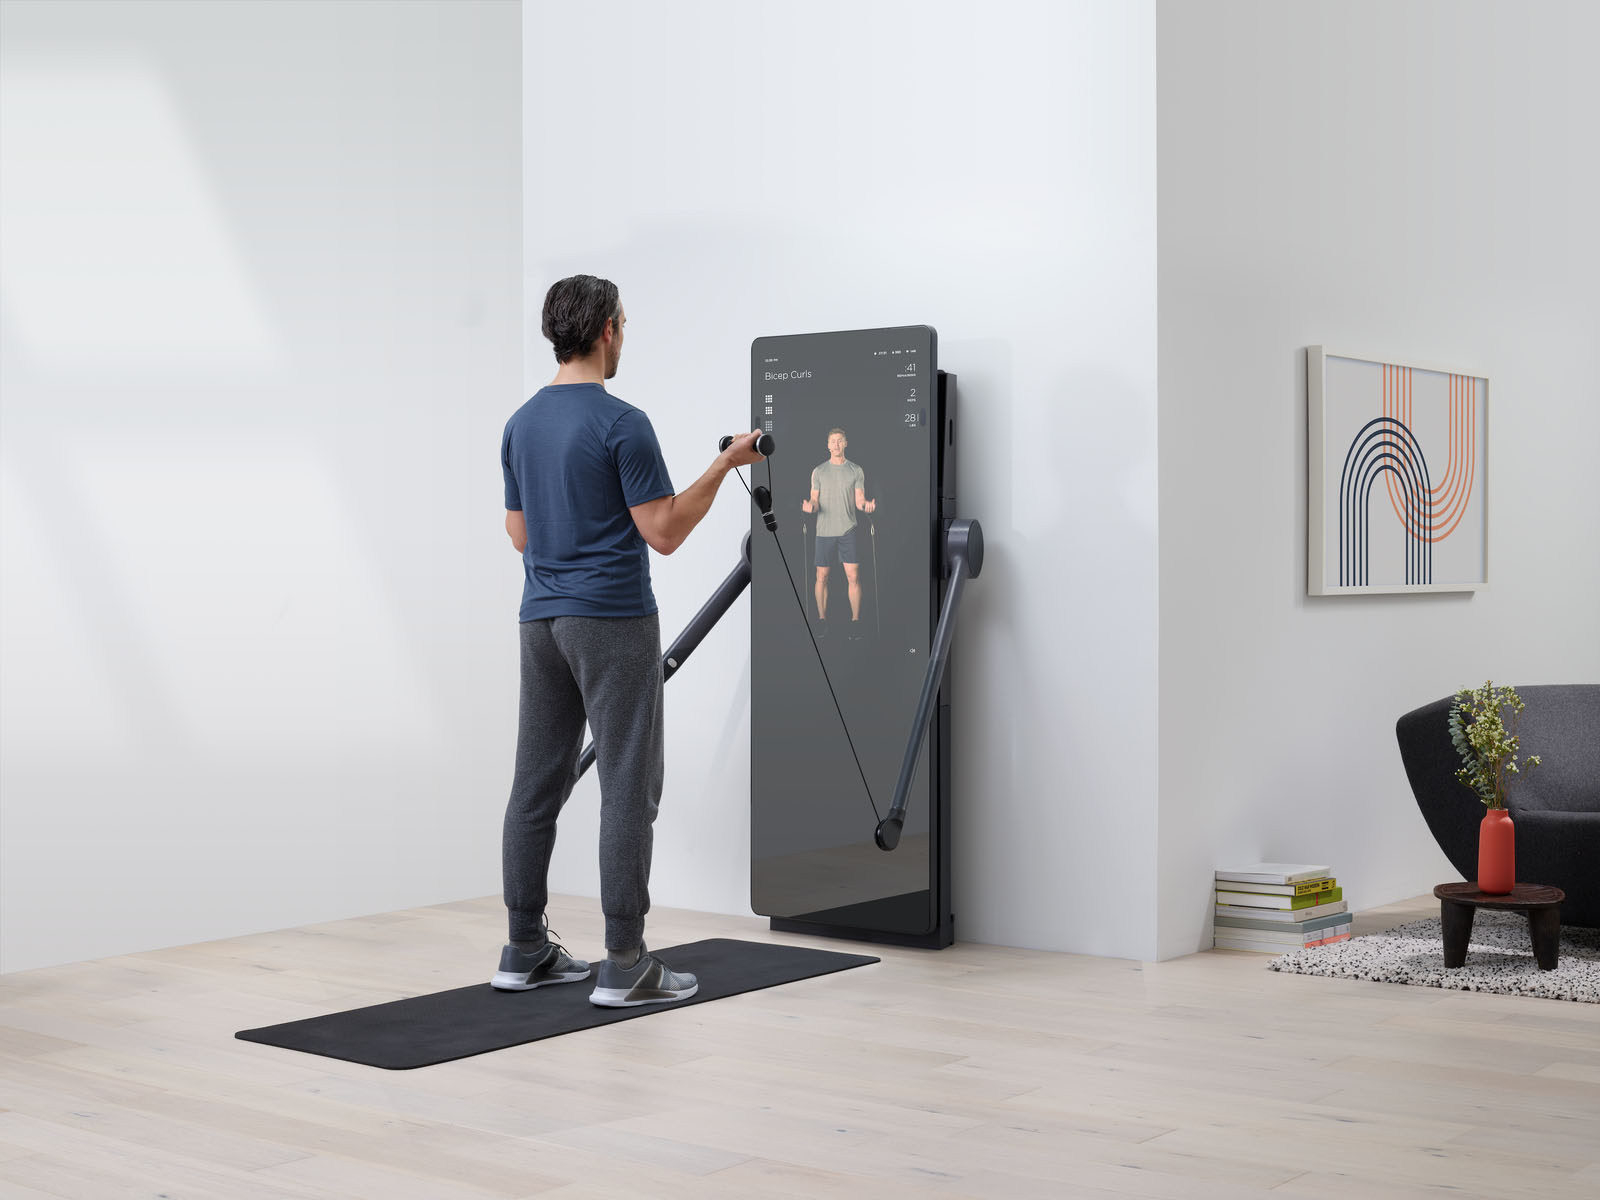 Forme Fitness Mirror Uses AI, Live Trainers for At-Home Workouts - Bloomberg